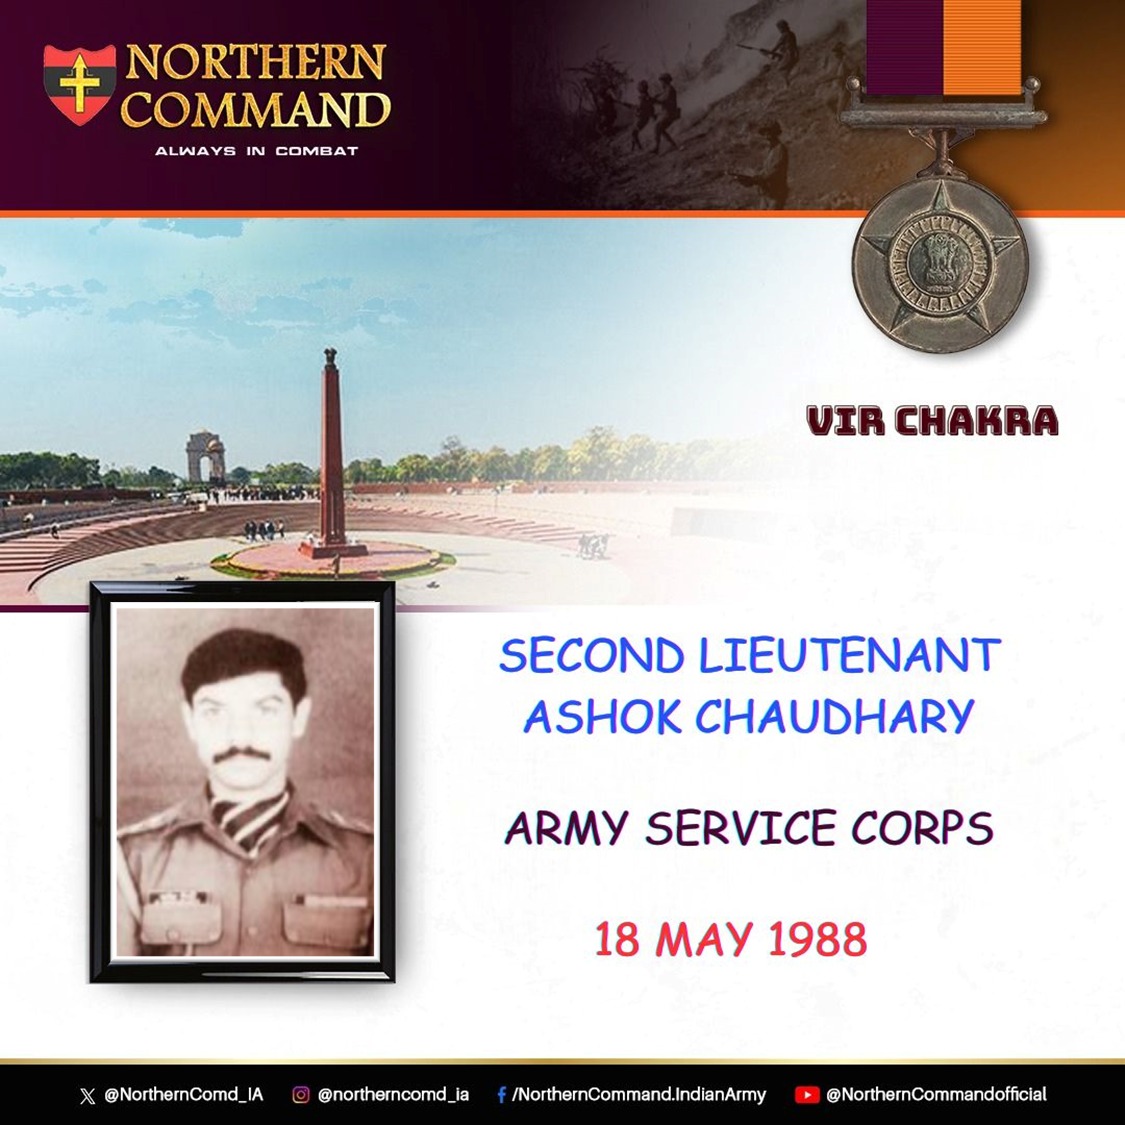 18 May 1988 #Siachen Second Lieutenant Ashok Chaudhary of ARMY SERVICE CORPS , post commander of a key post in #SiachenGlacier, courageously led his troops and repulsed the enemy attack. Unmindful of inclement weather & 400 feet Ice Wall, he rappelled down to cut off the